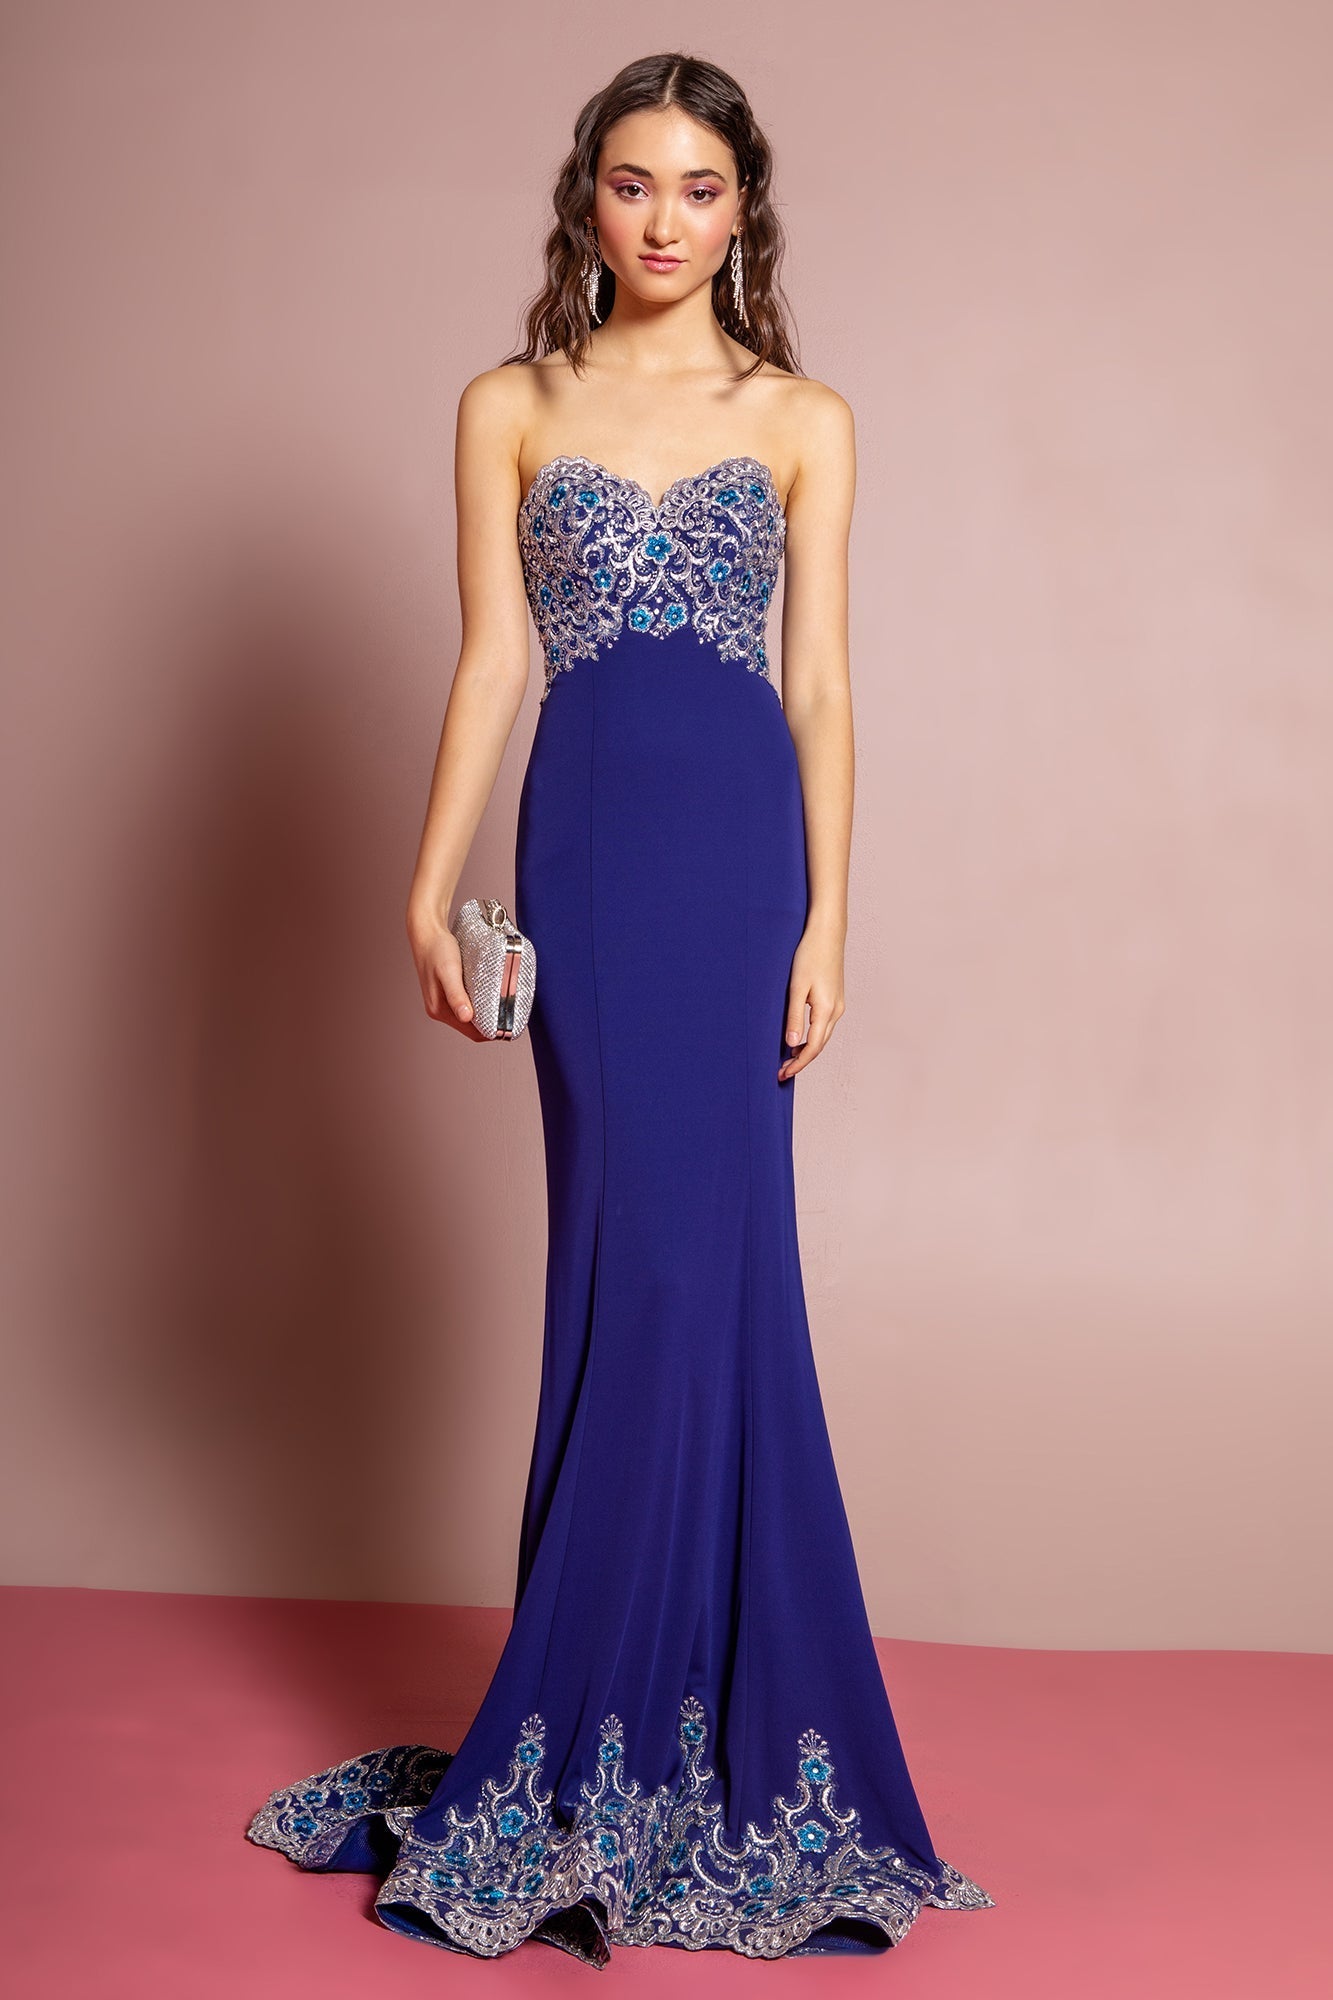 Lace Embellished Strapless Floor Length Dress GLGL1367 Elsy Style PROM